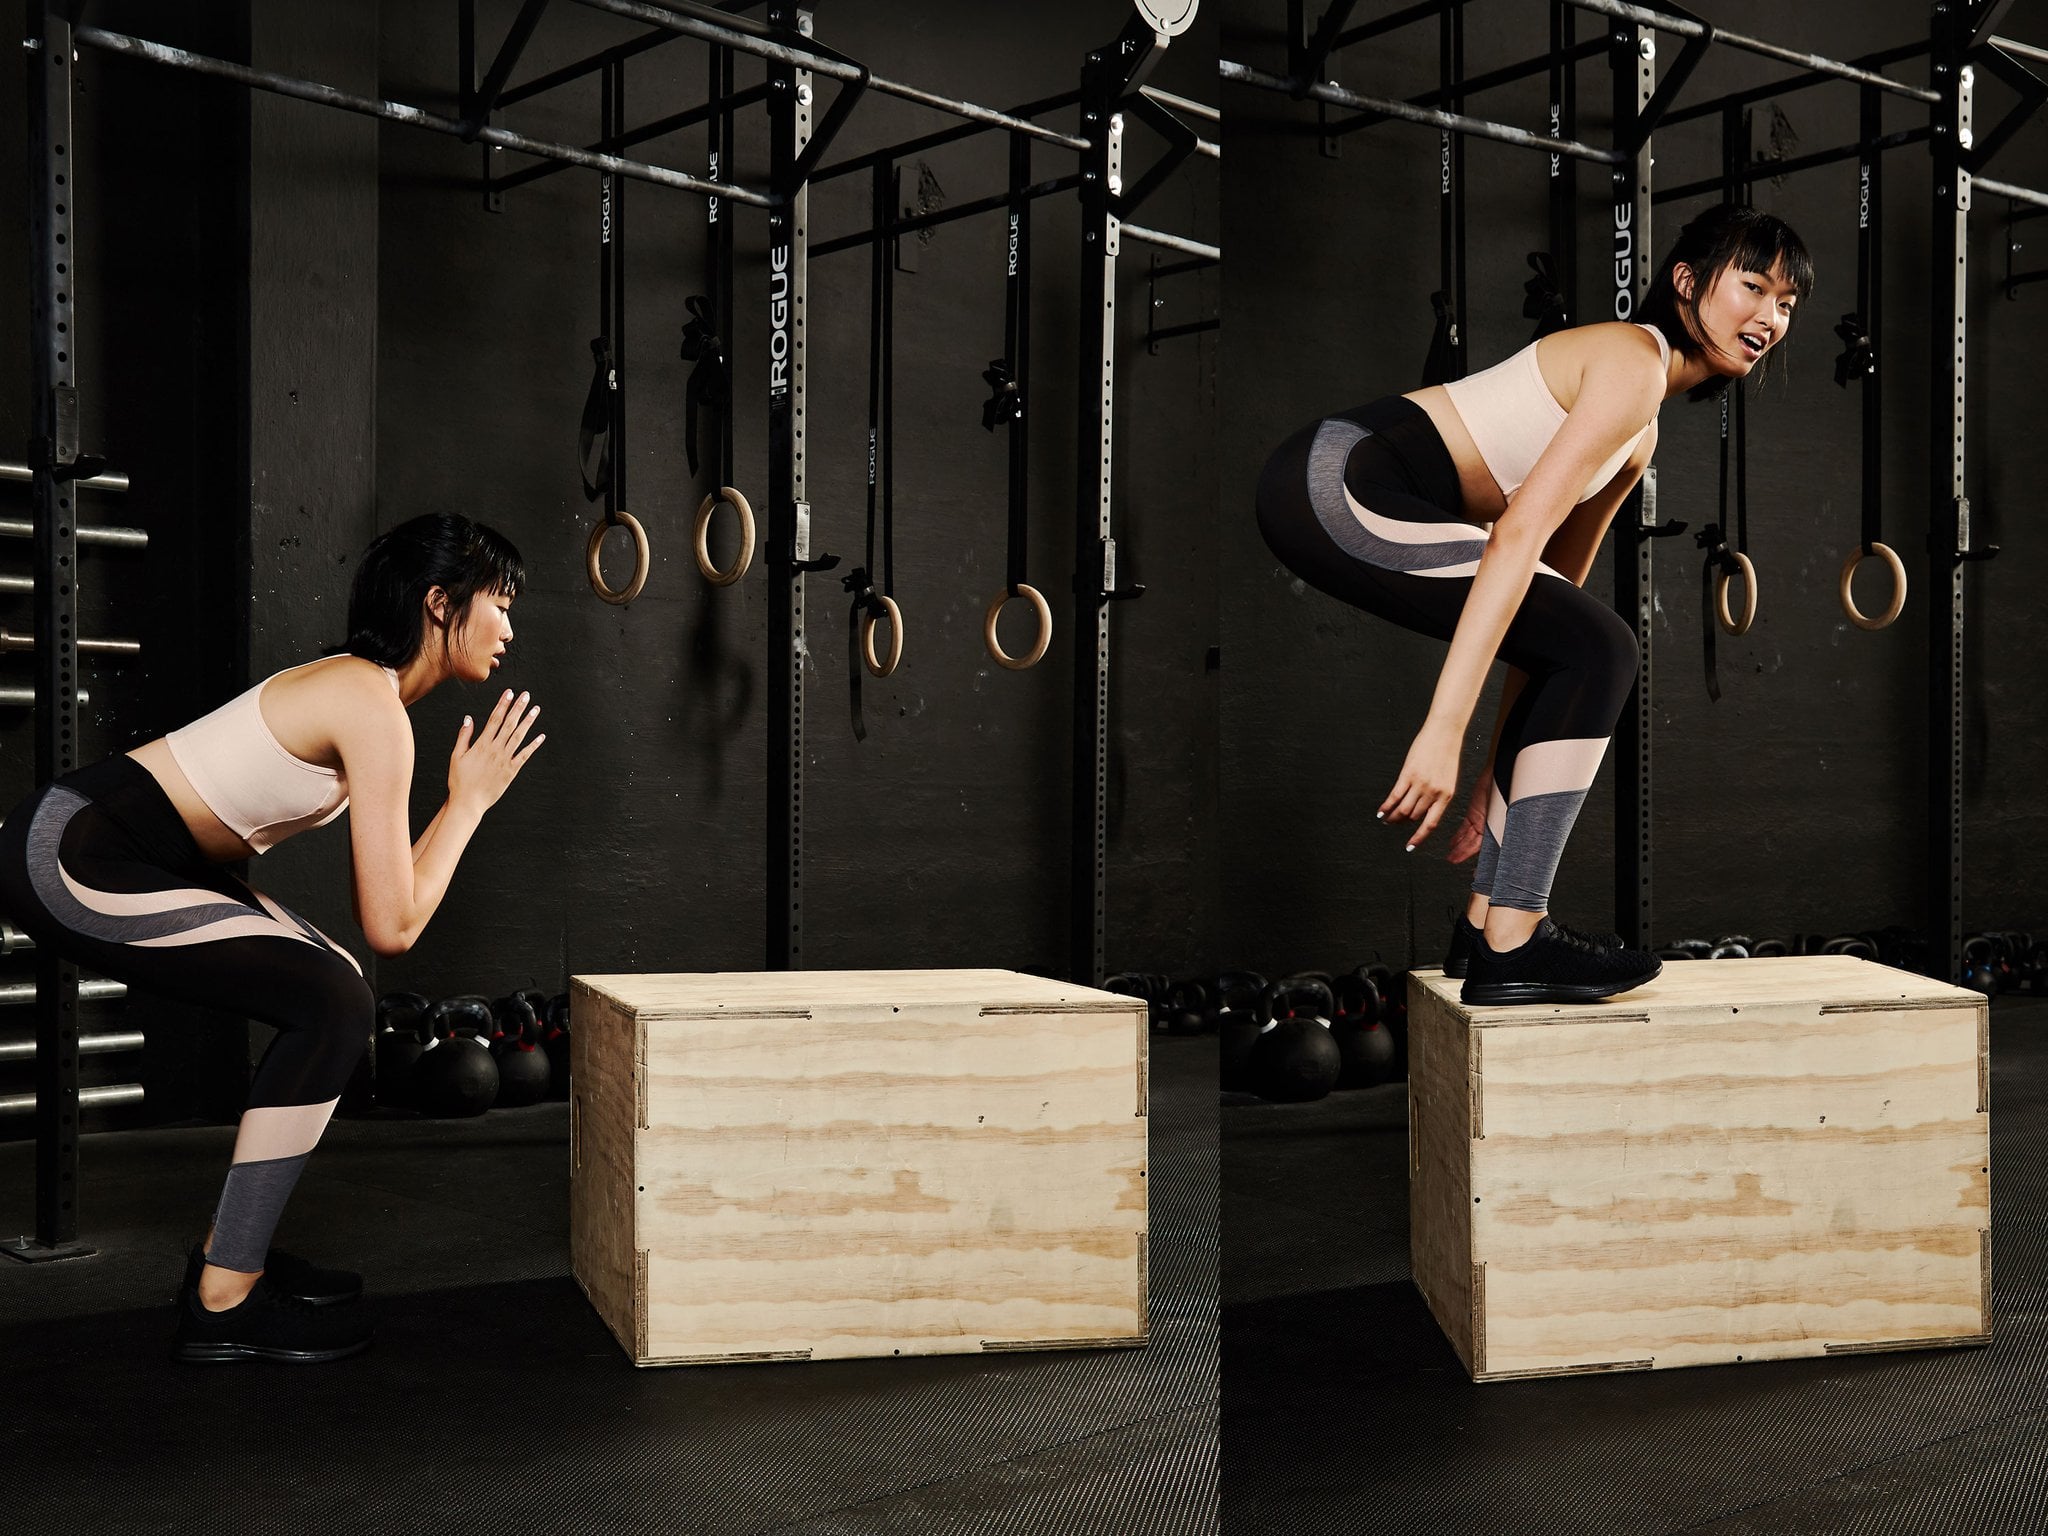 How to Do a Box Jump Safely and Effectively